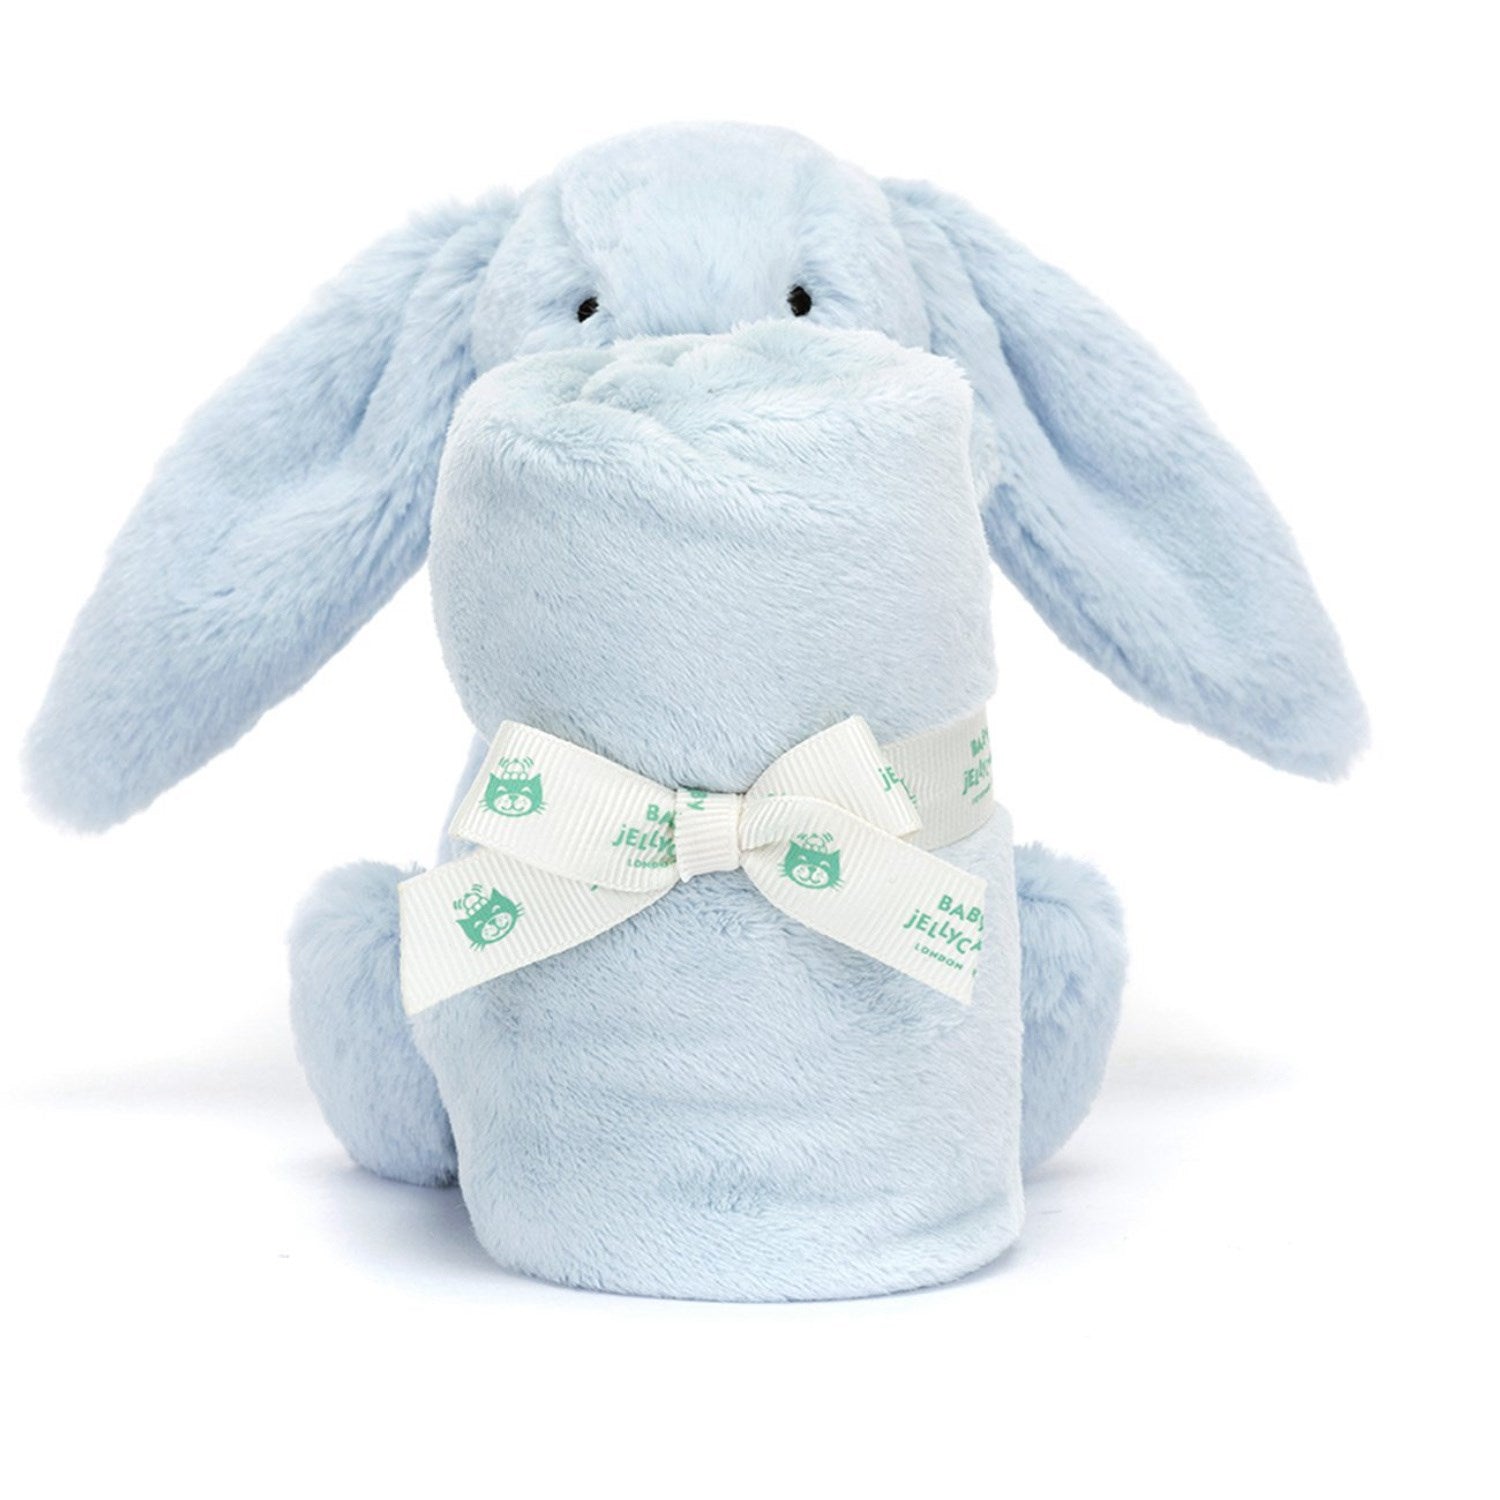   Bashful Blue Bunny Soother 4